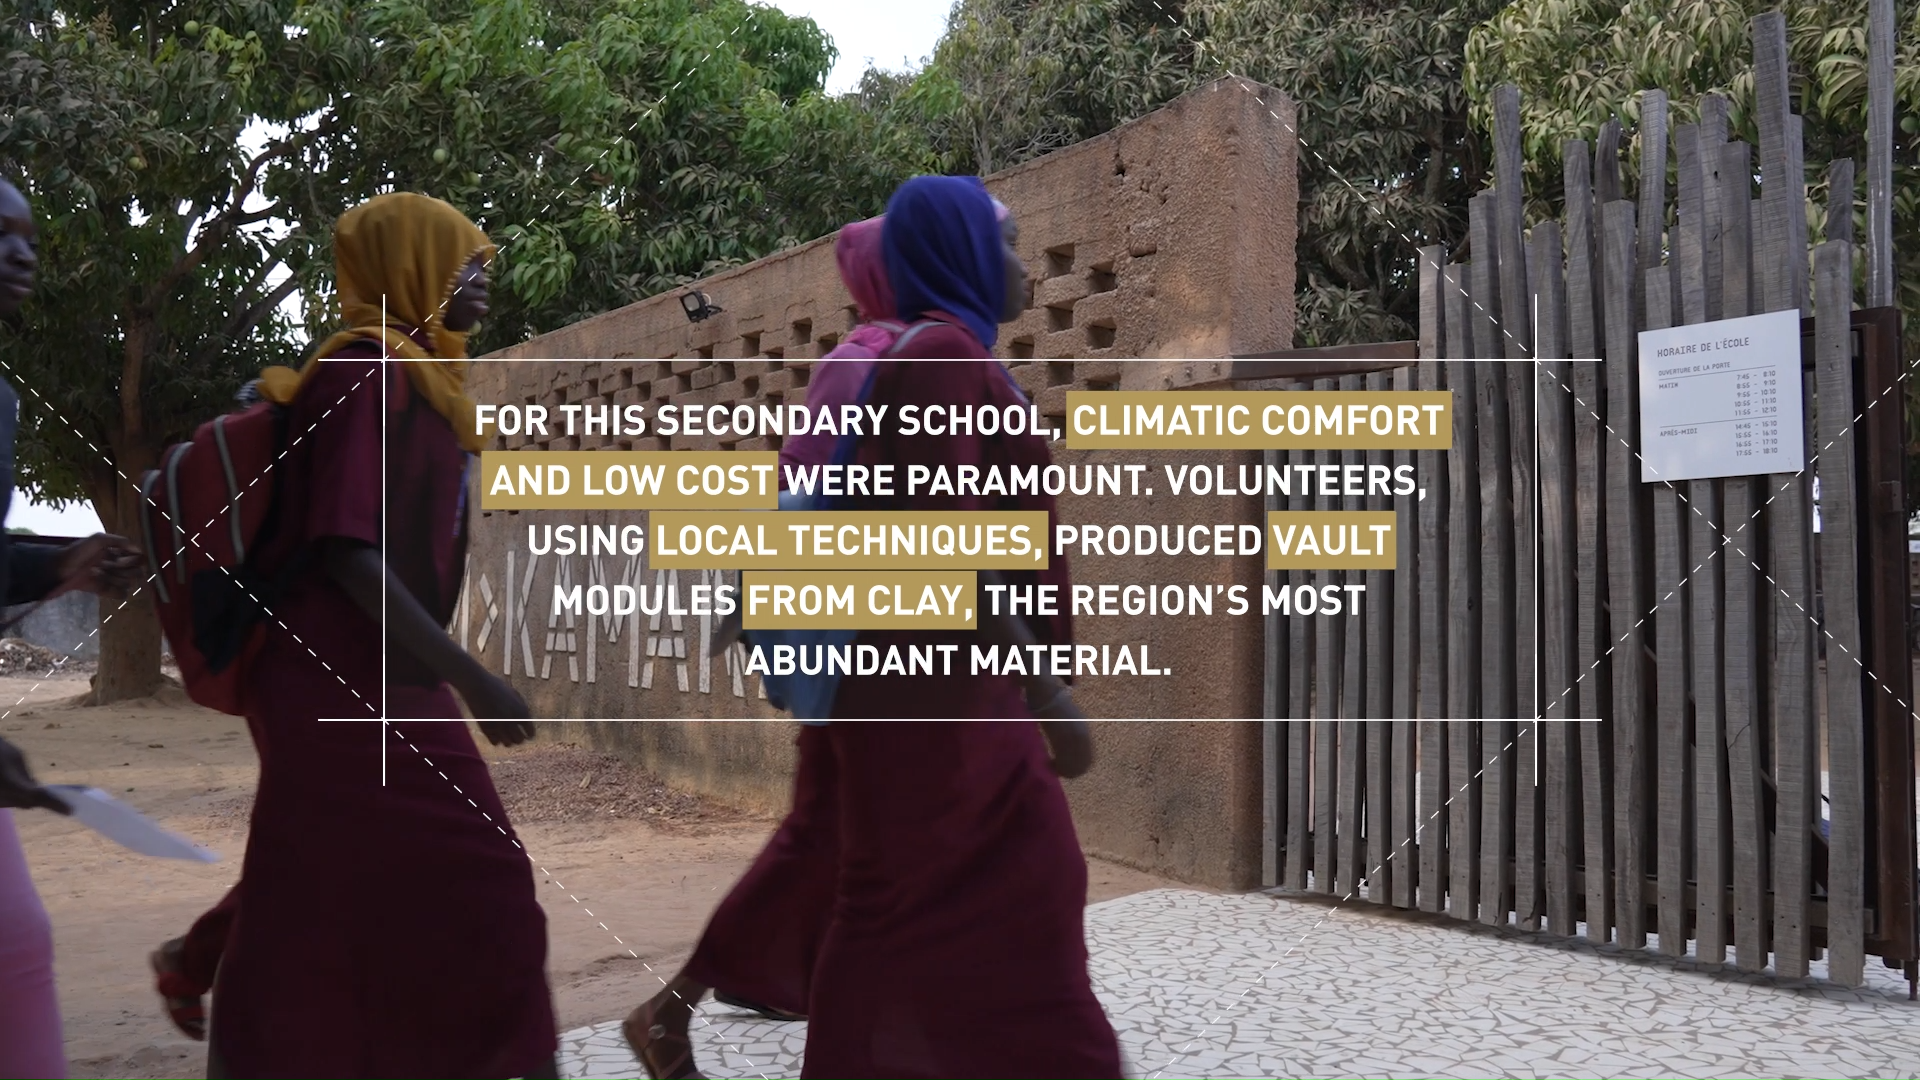 <p>CEM Kamanar Secondary School,&nbsp;Ziguinchor, Senegal, by Dawoffice: For this secondary school, volunteers, using local techniques, produced vault modules from clay which (with lattices) act as evaporating coolers.</p>